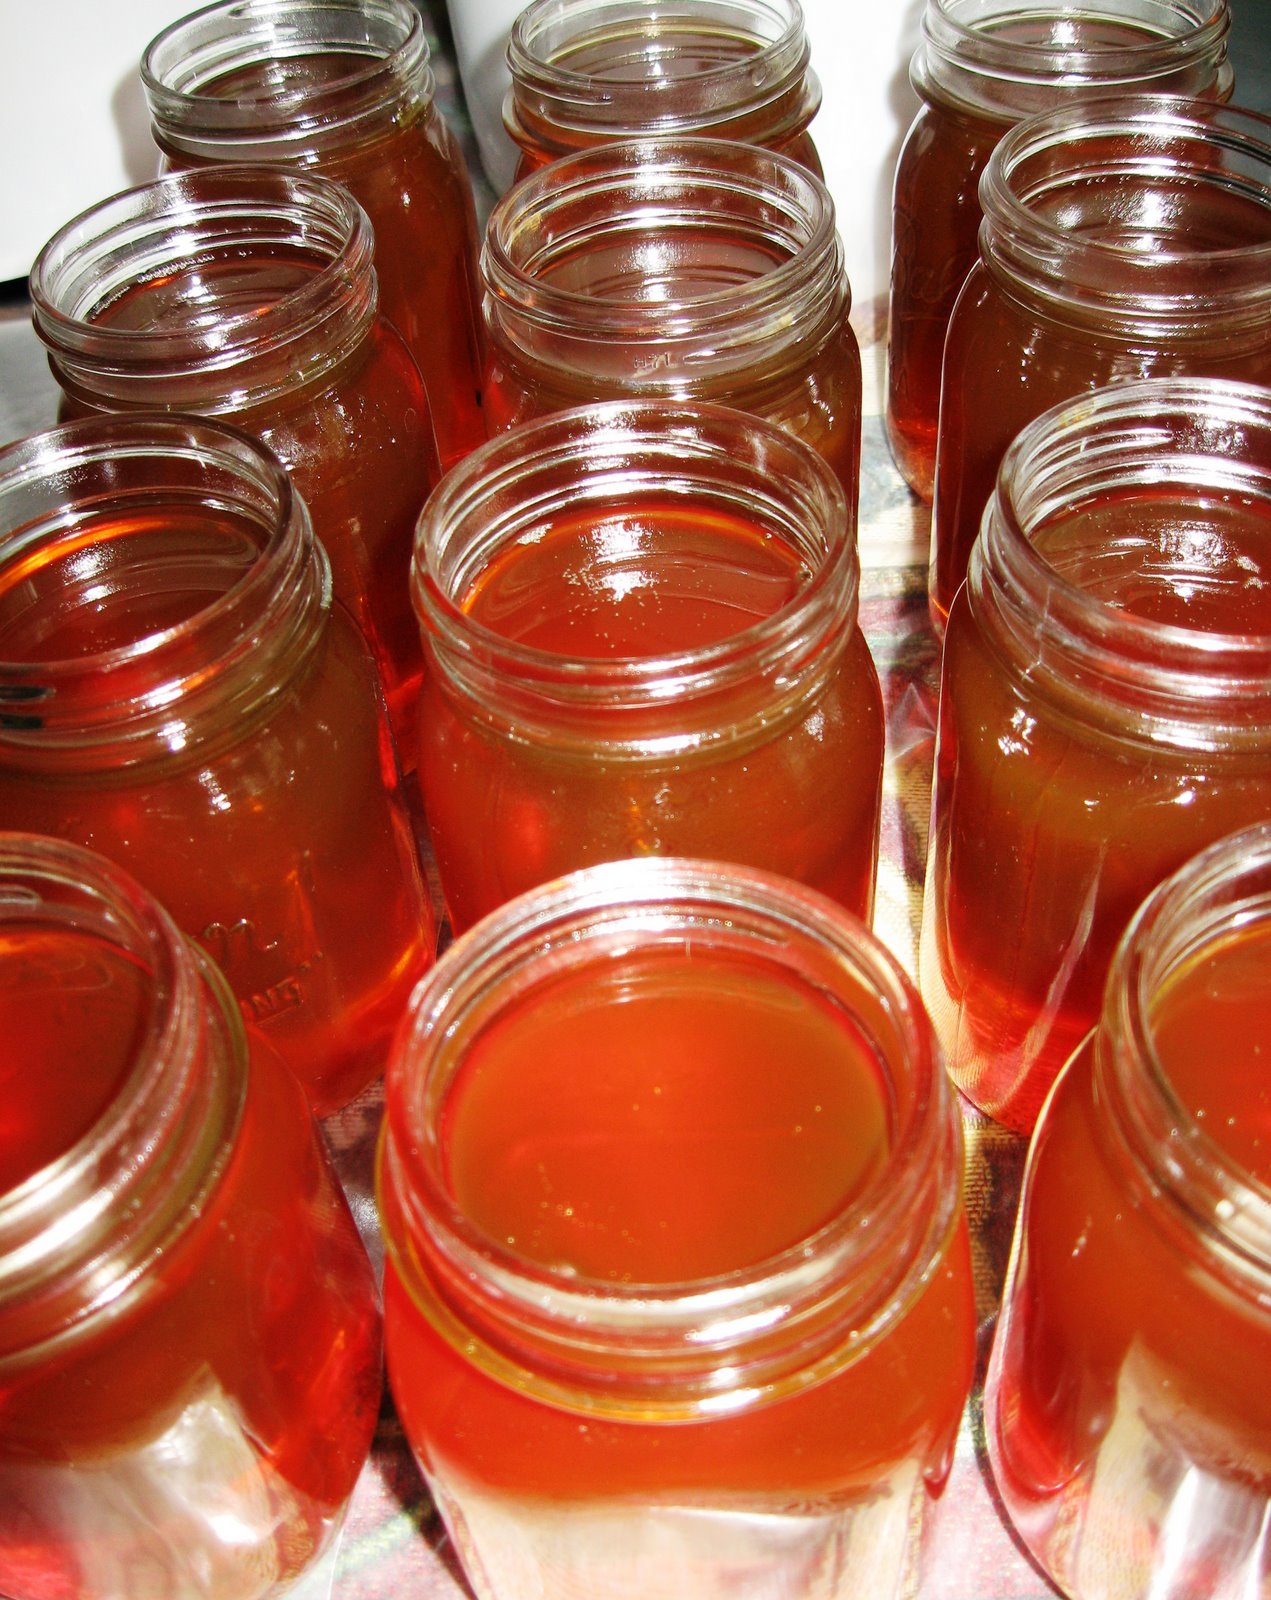 [072198+Bees+and+Putting+Honey+in+Jars+027.jpg]